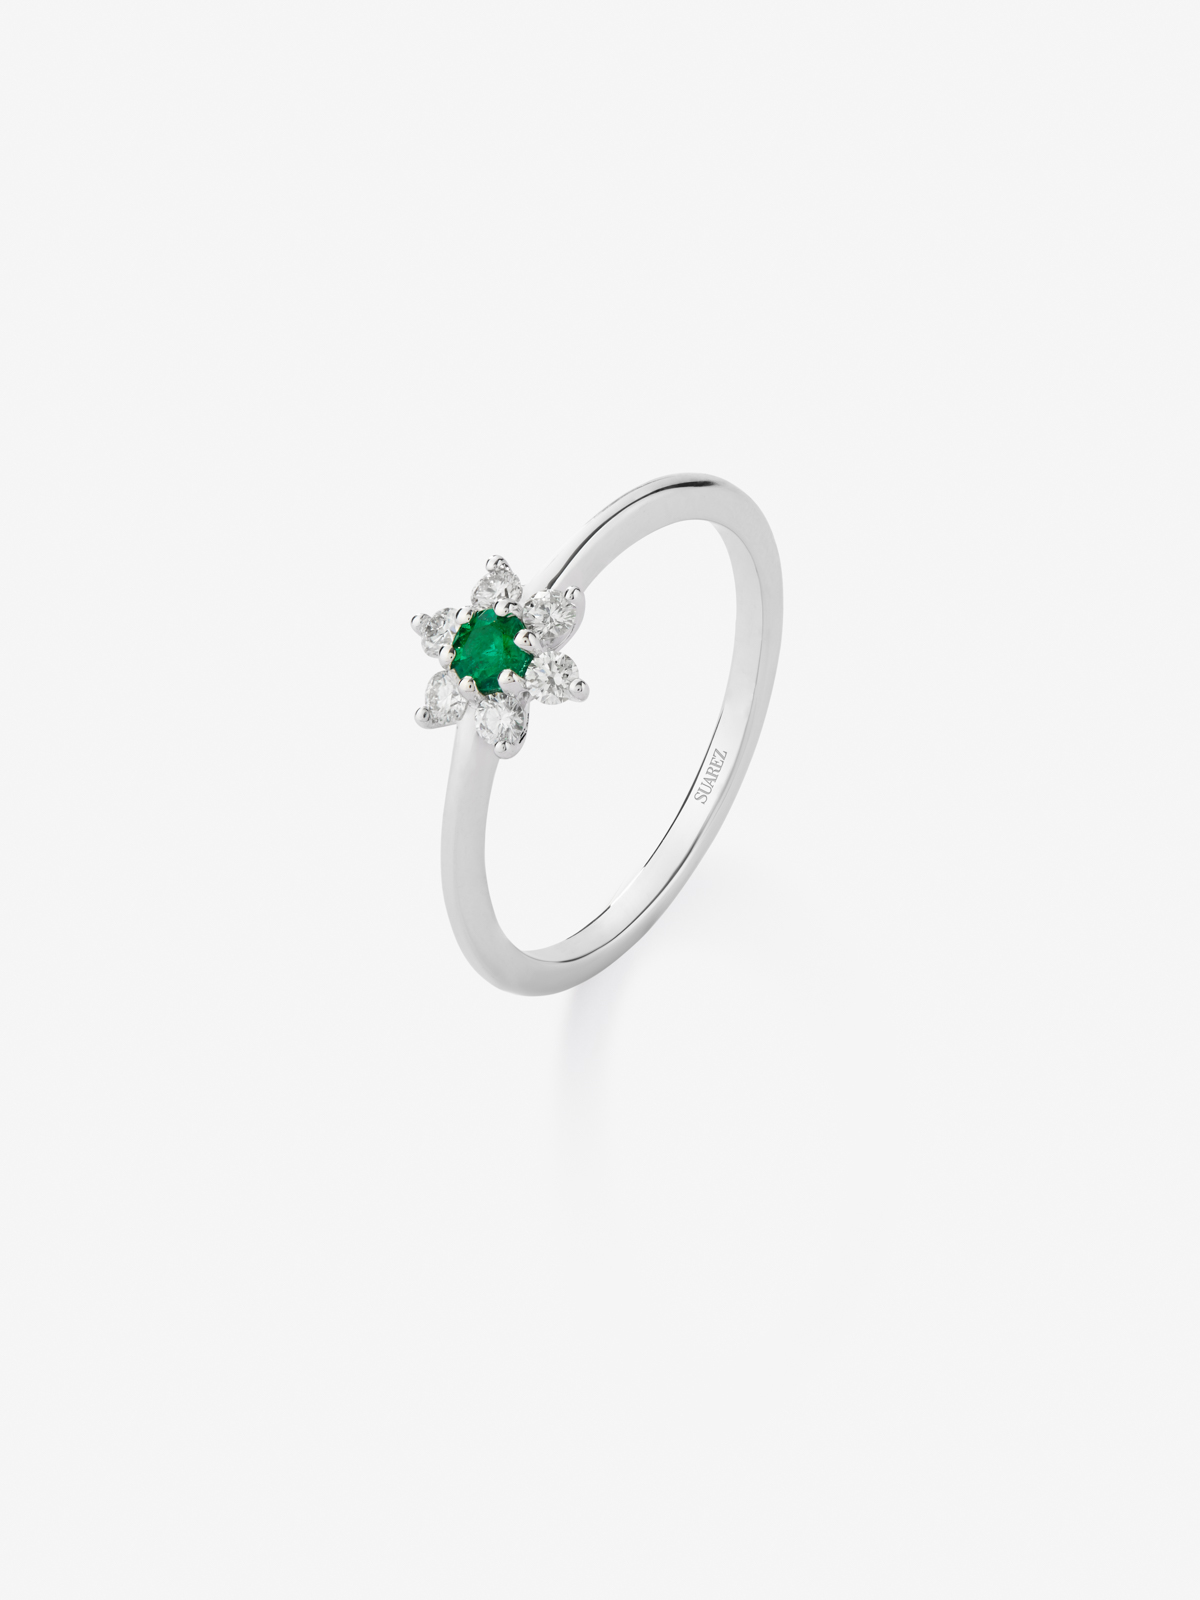 18K white gold ring with green emerald in bright size of 0.08 cts and white diamonds in bright size of 0.15 CTS star -shaped shape